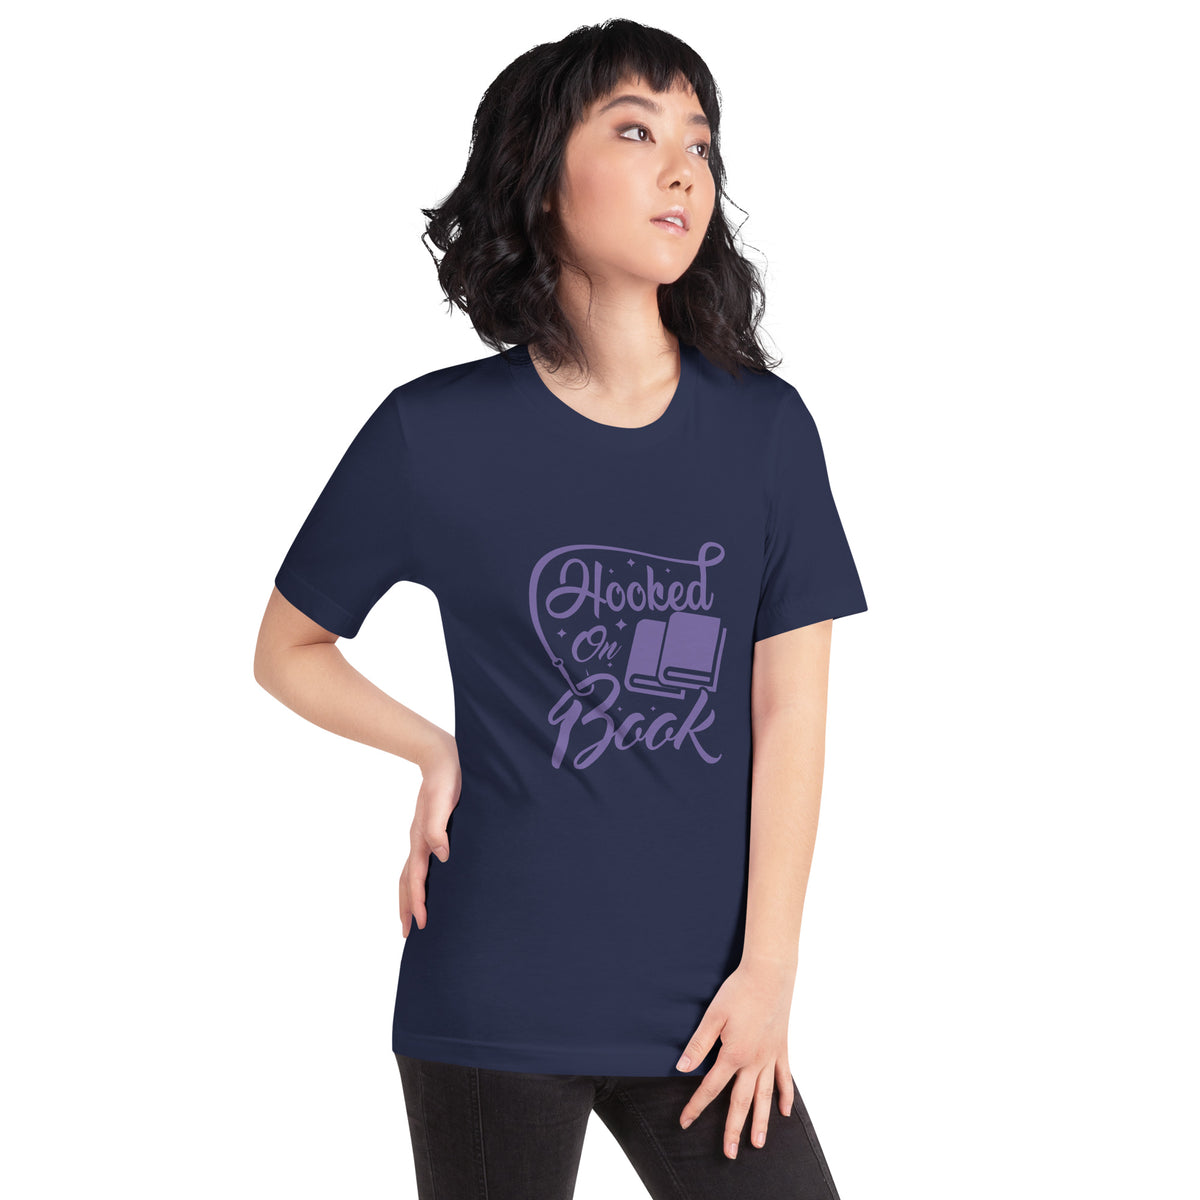 Hooked on a Book Tee